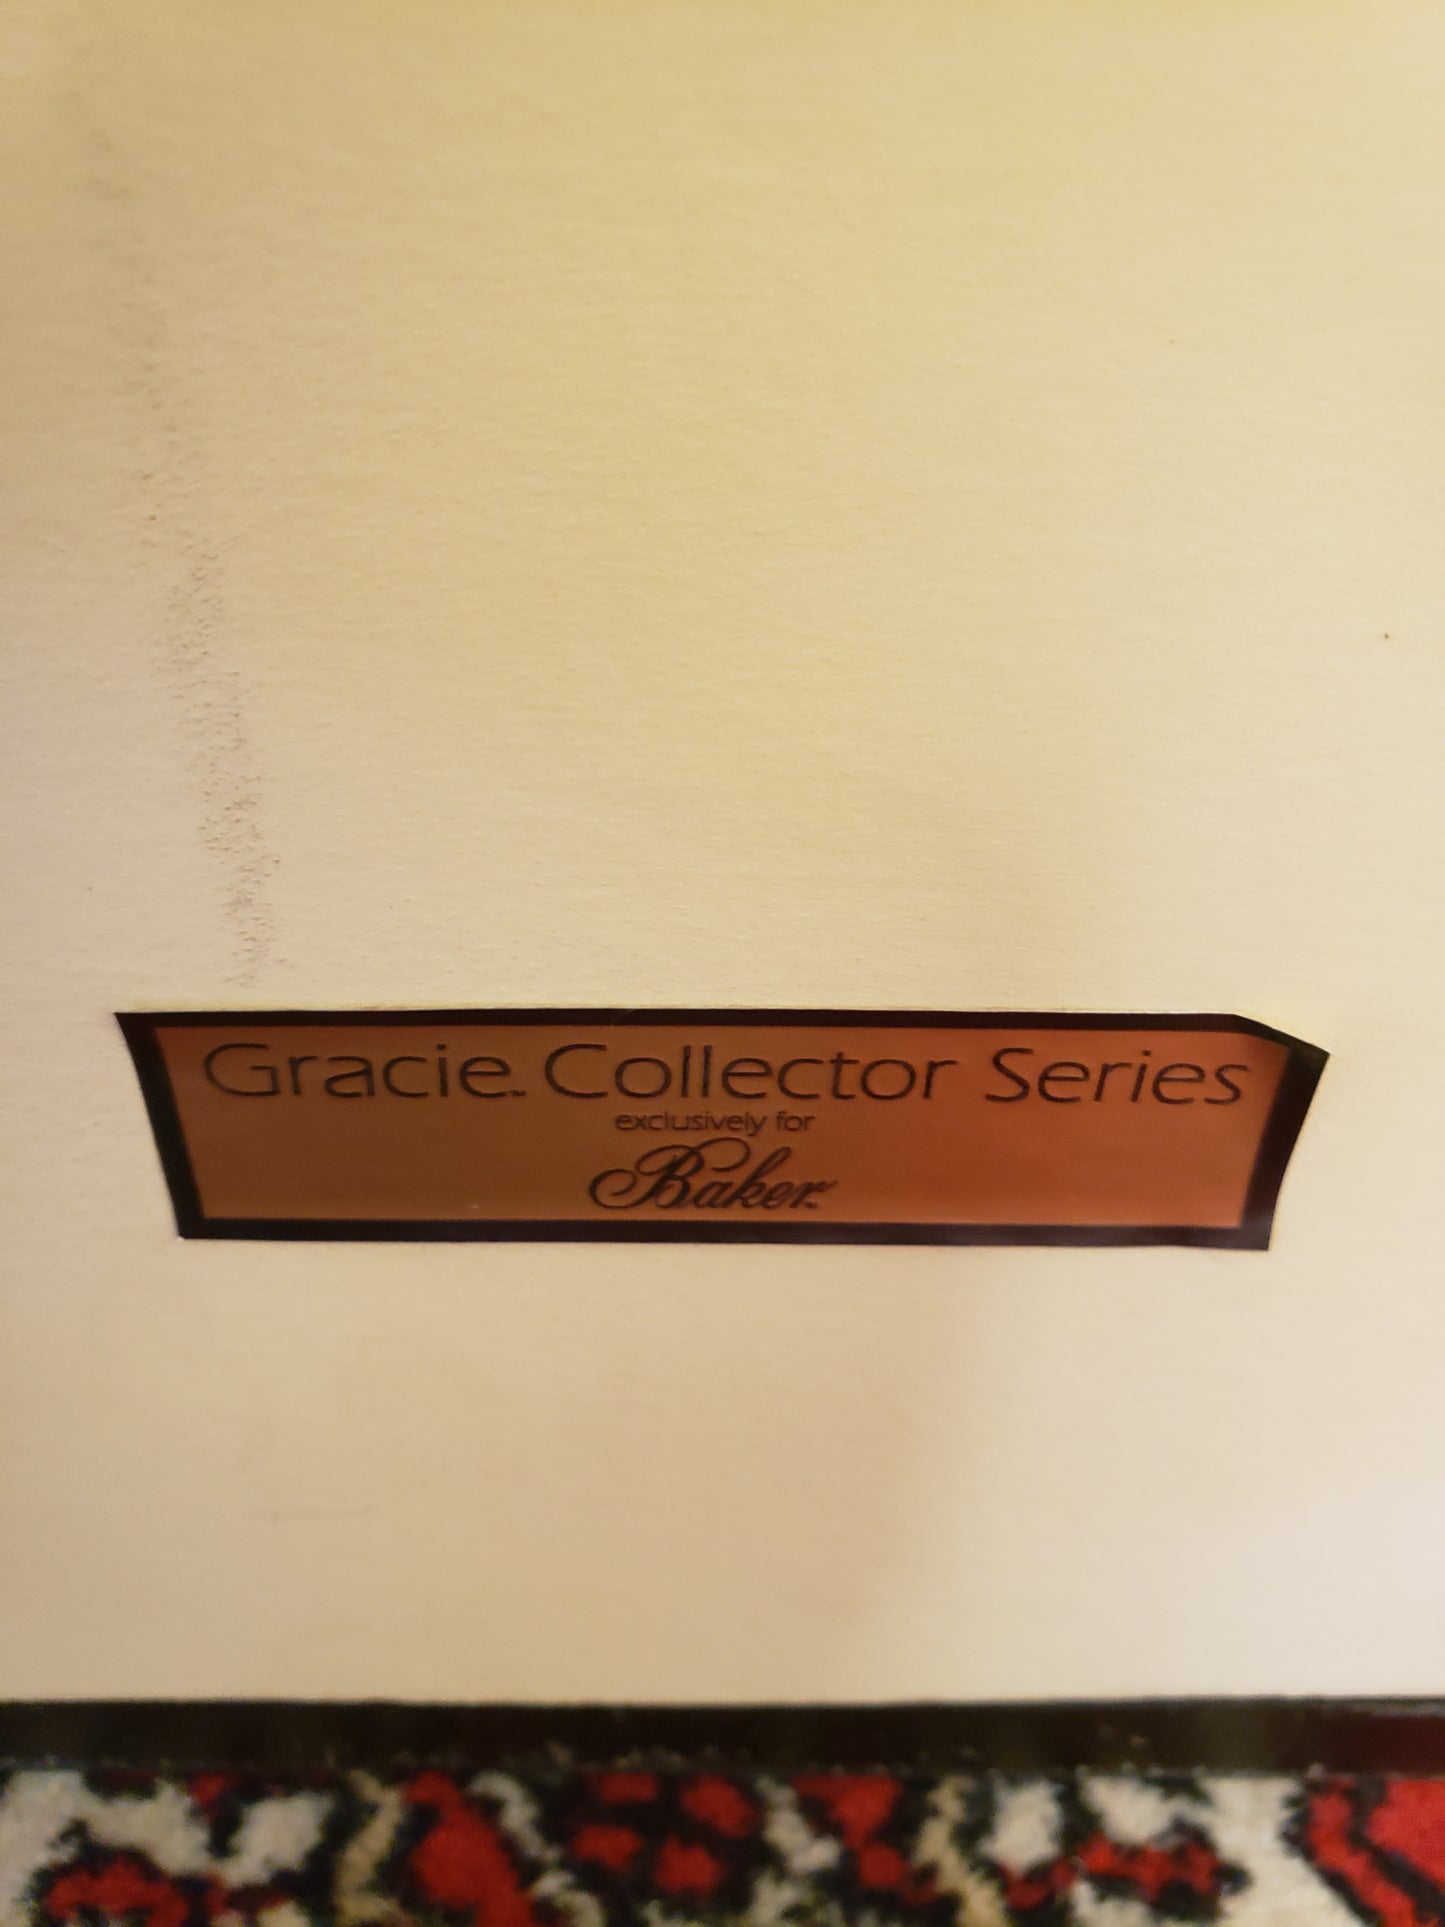 Gracie Collector Series for Baker Furniture Peacock Panel